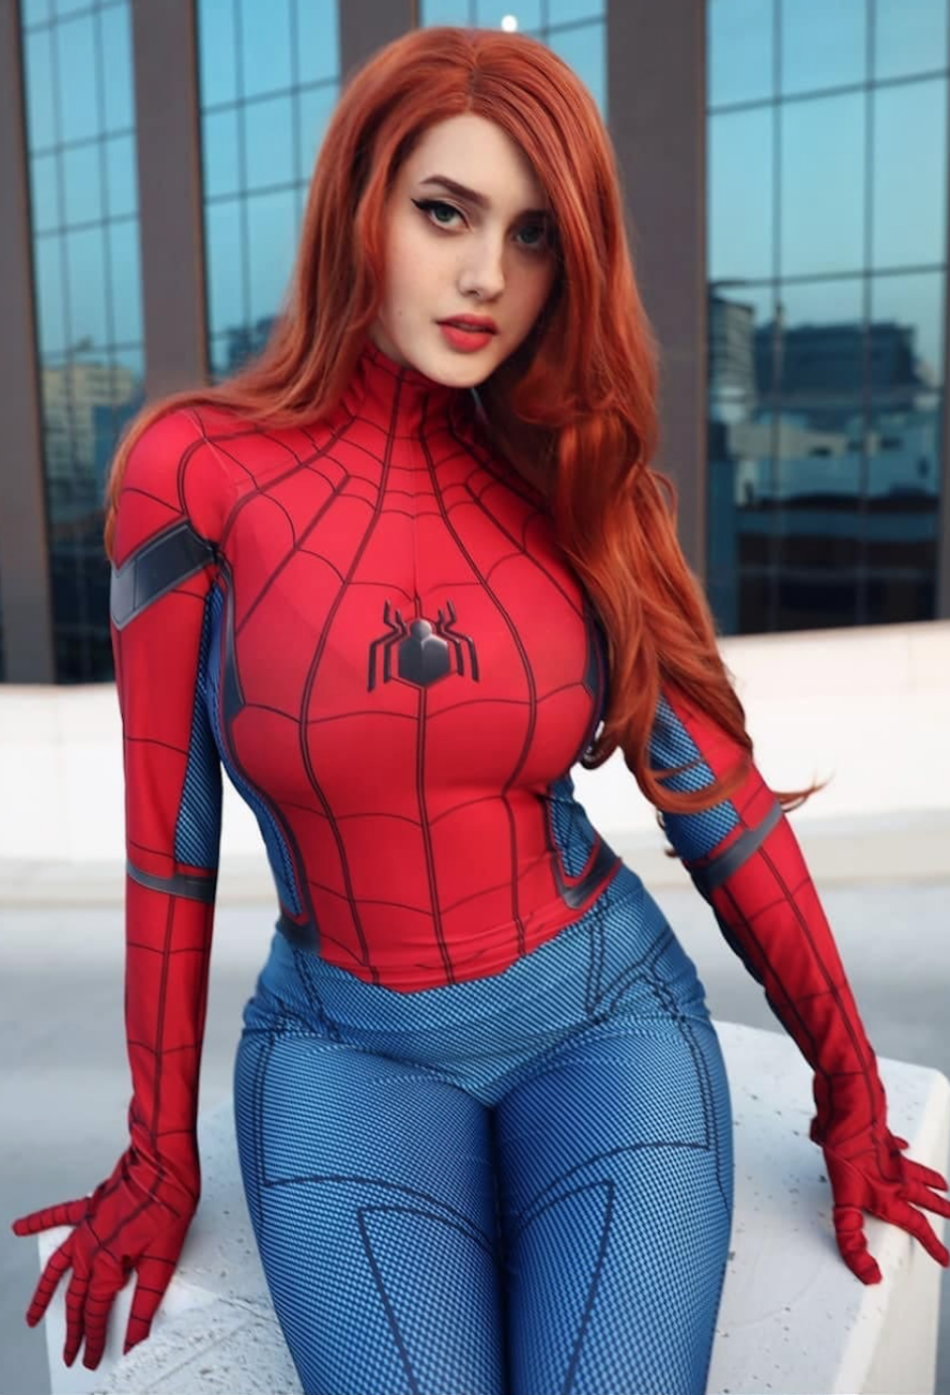 Sexy Red Hot Cosplay Girls Spiderman Women Best Photo Compilation 2021 (89 HQ Photos) 40